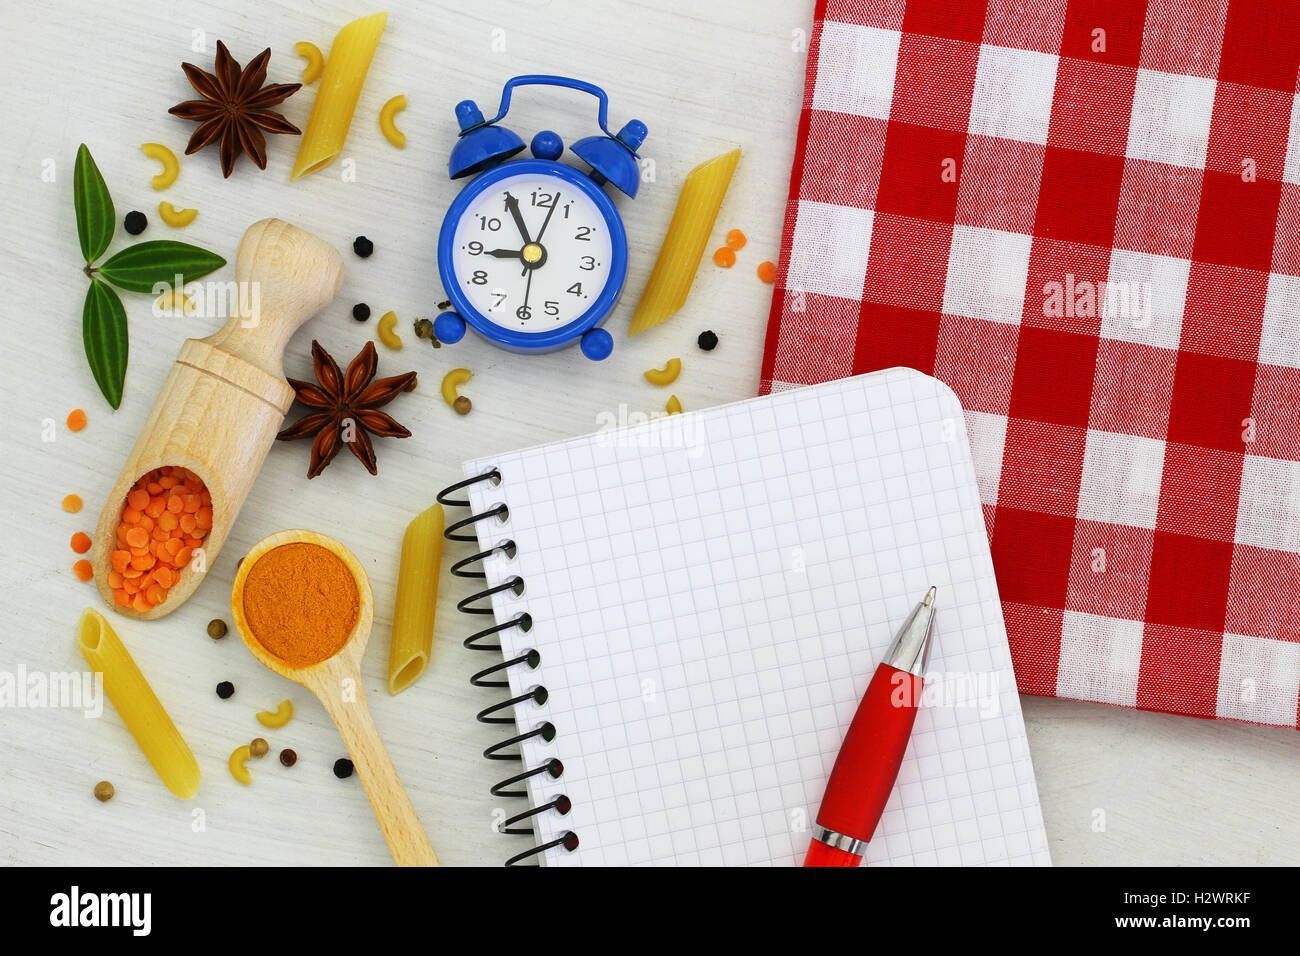 Empty notebook with pen, miniature clock and different ingredients spread around it Stock Photo